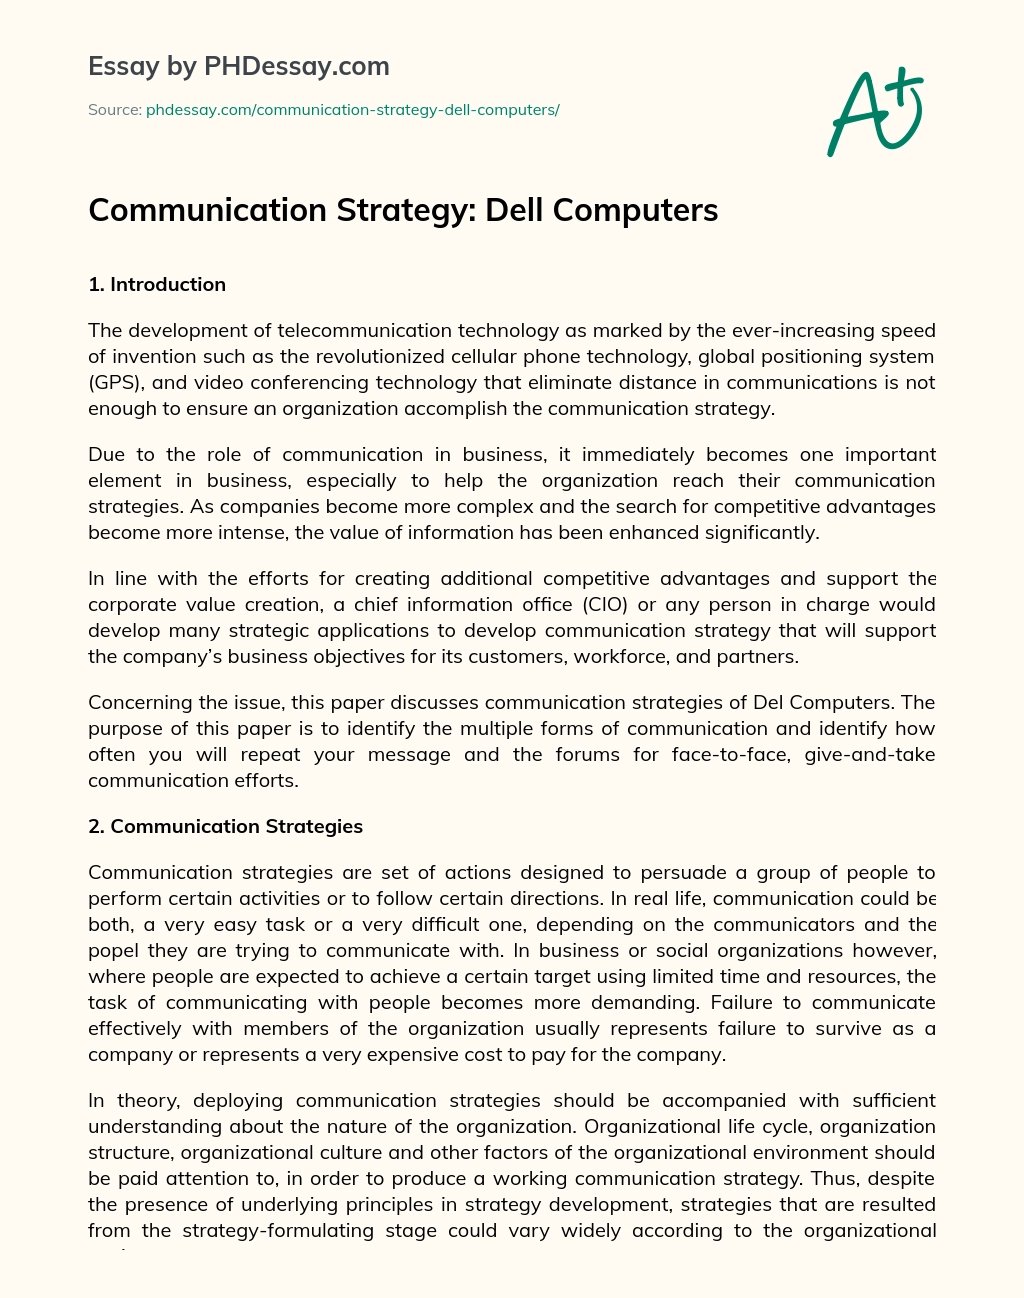 Communication Strategy: Dell Computers essay